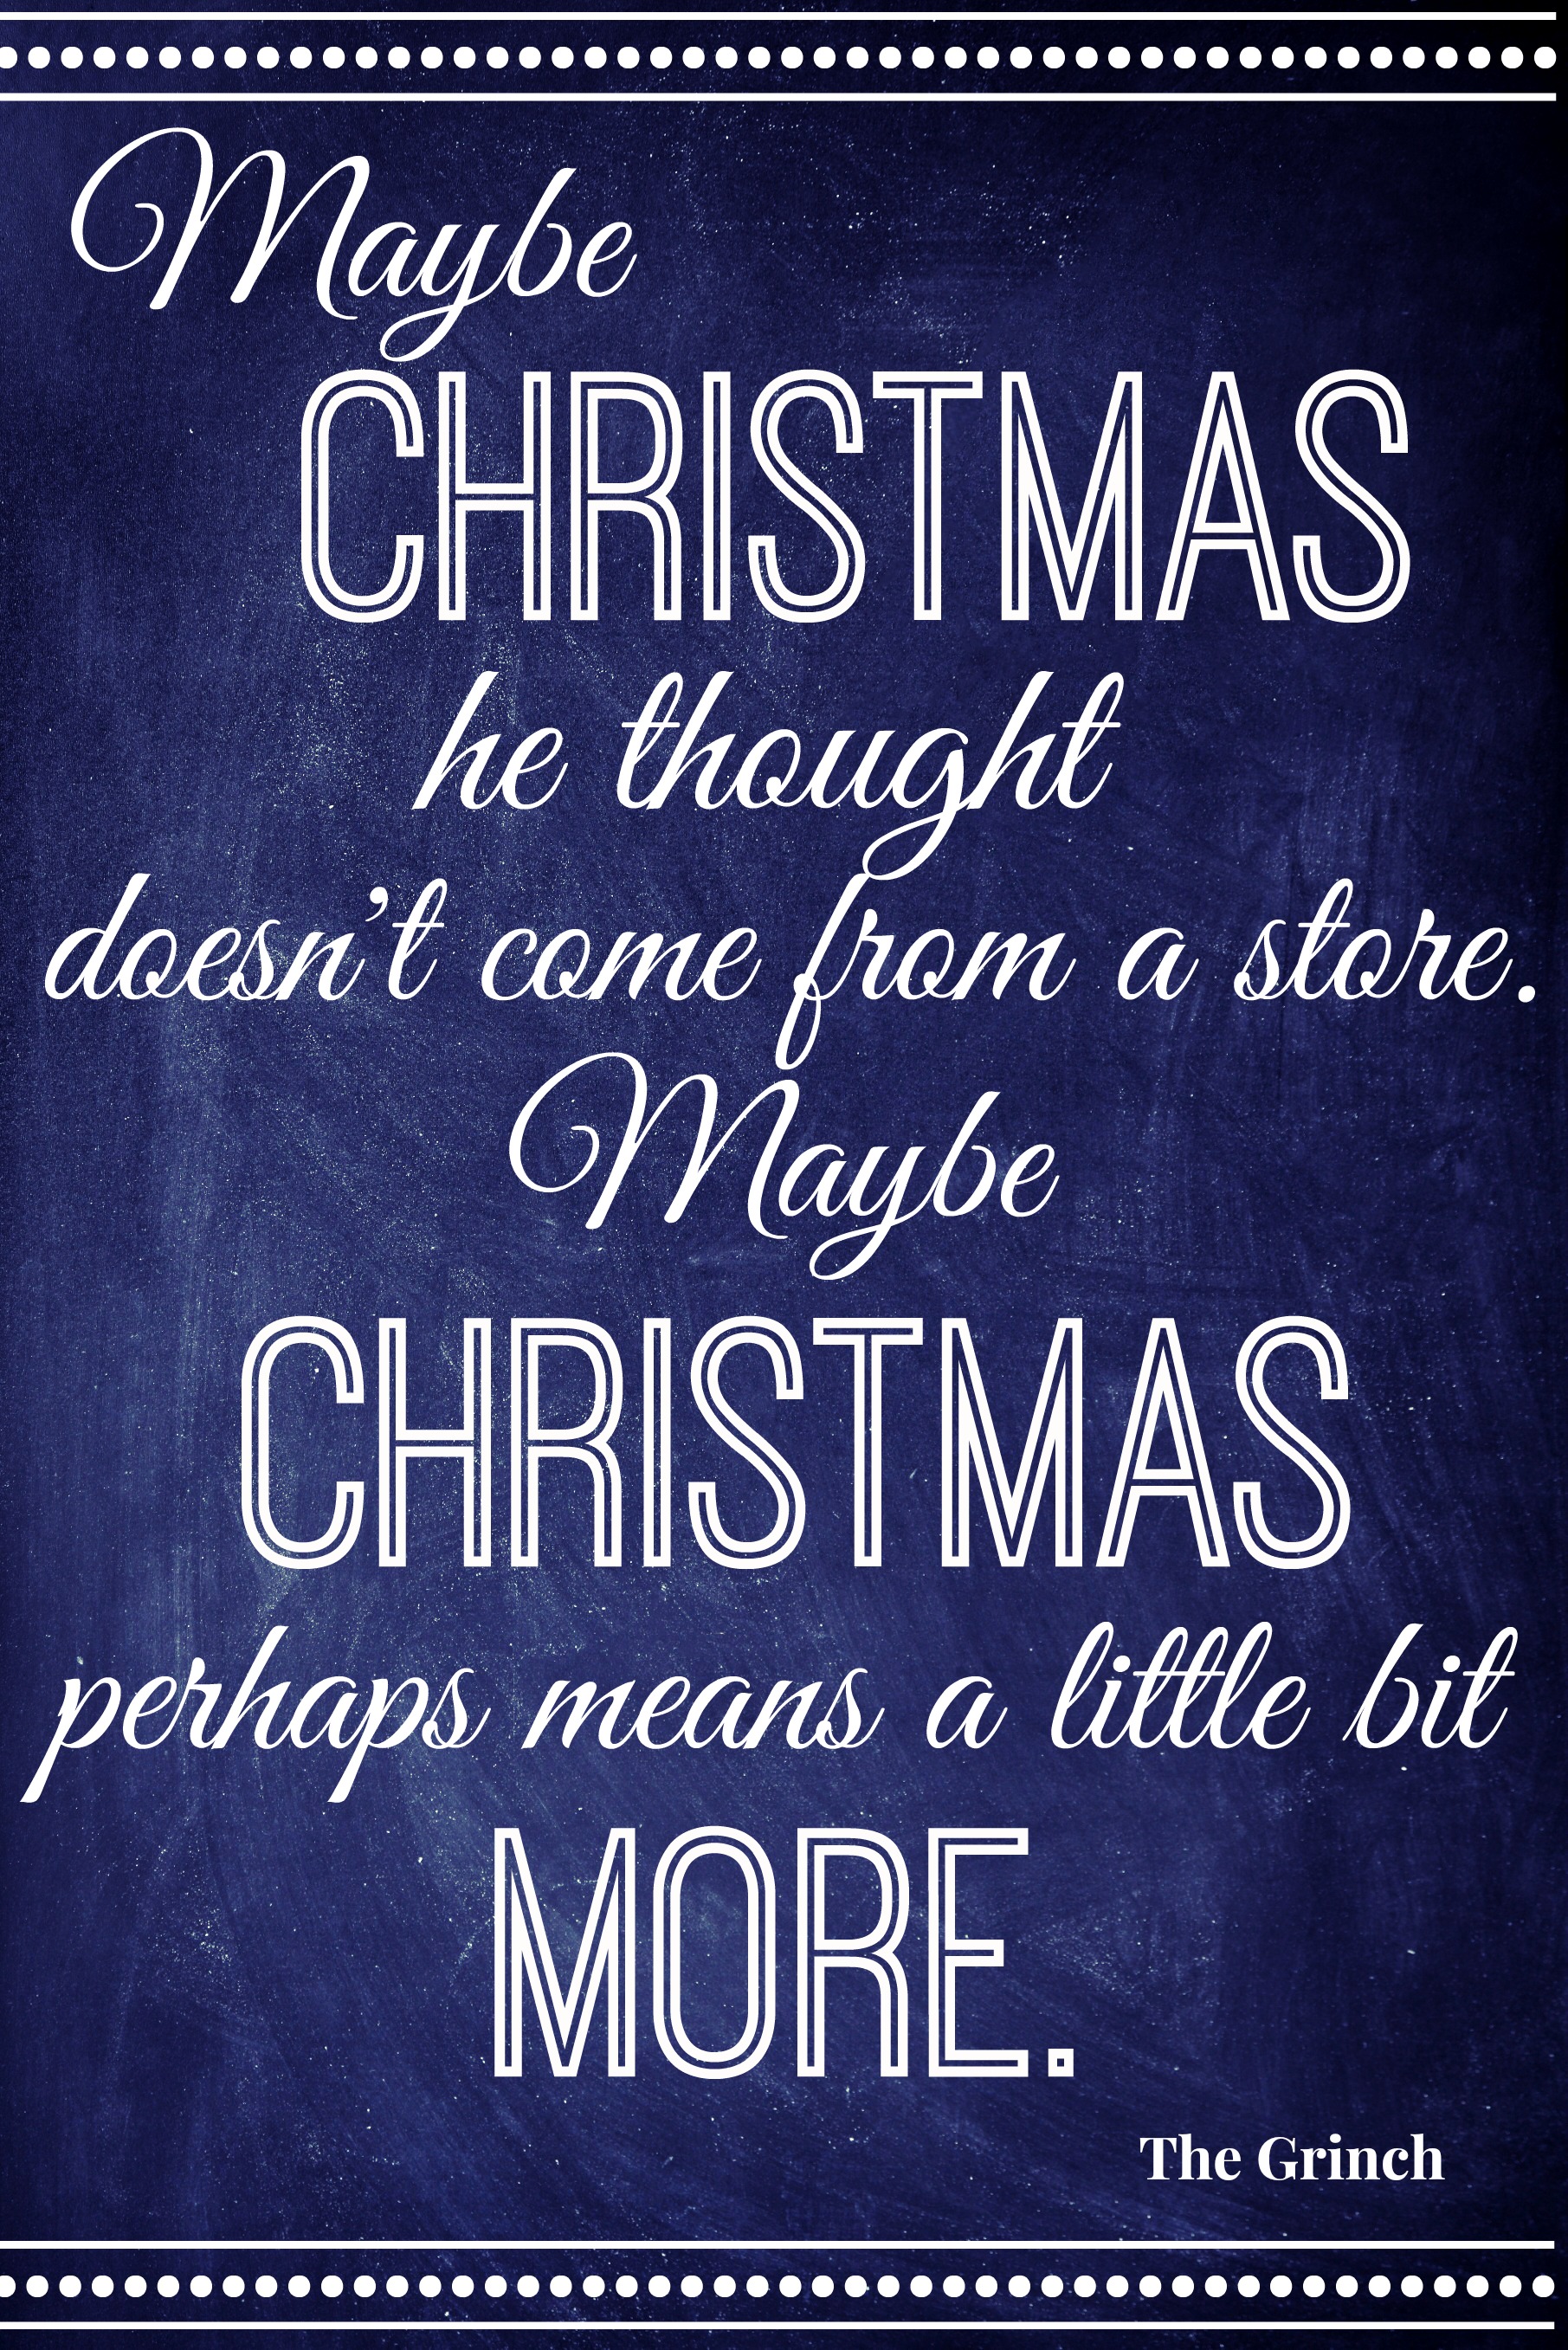 Holiday Quote Images Christmas Perhaps means a little bit more 